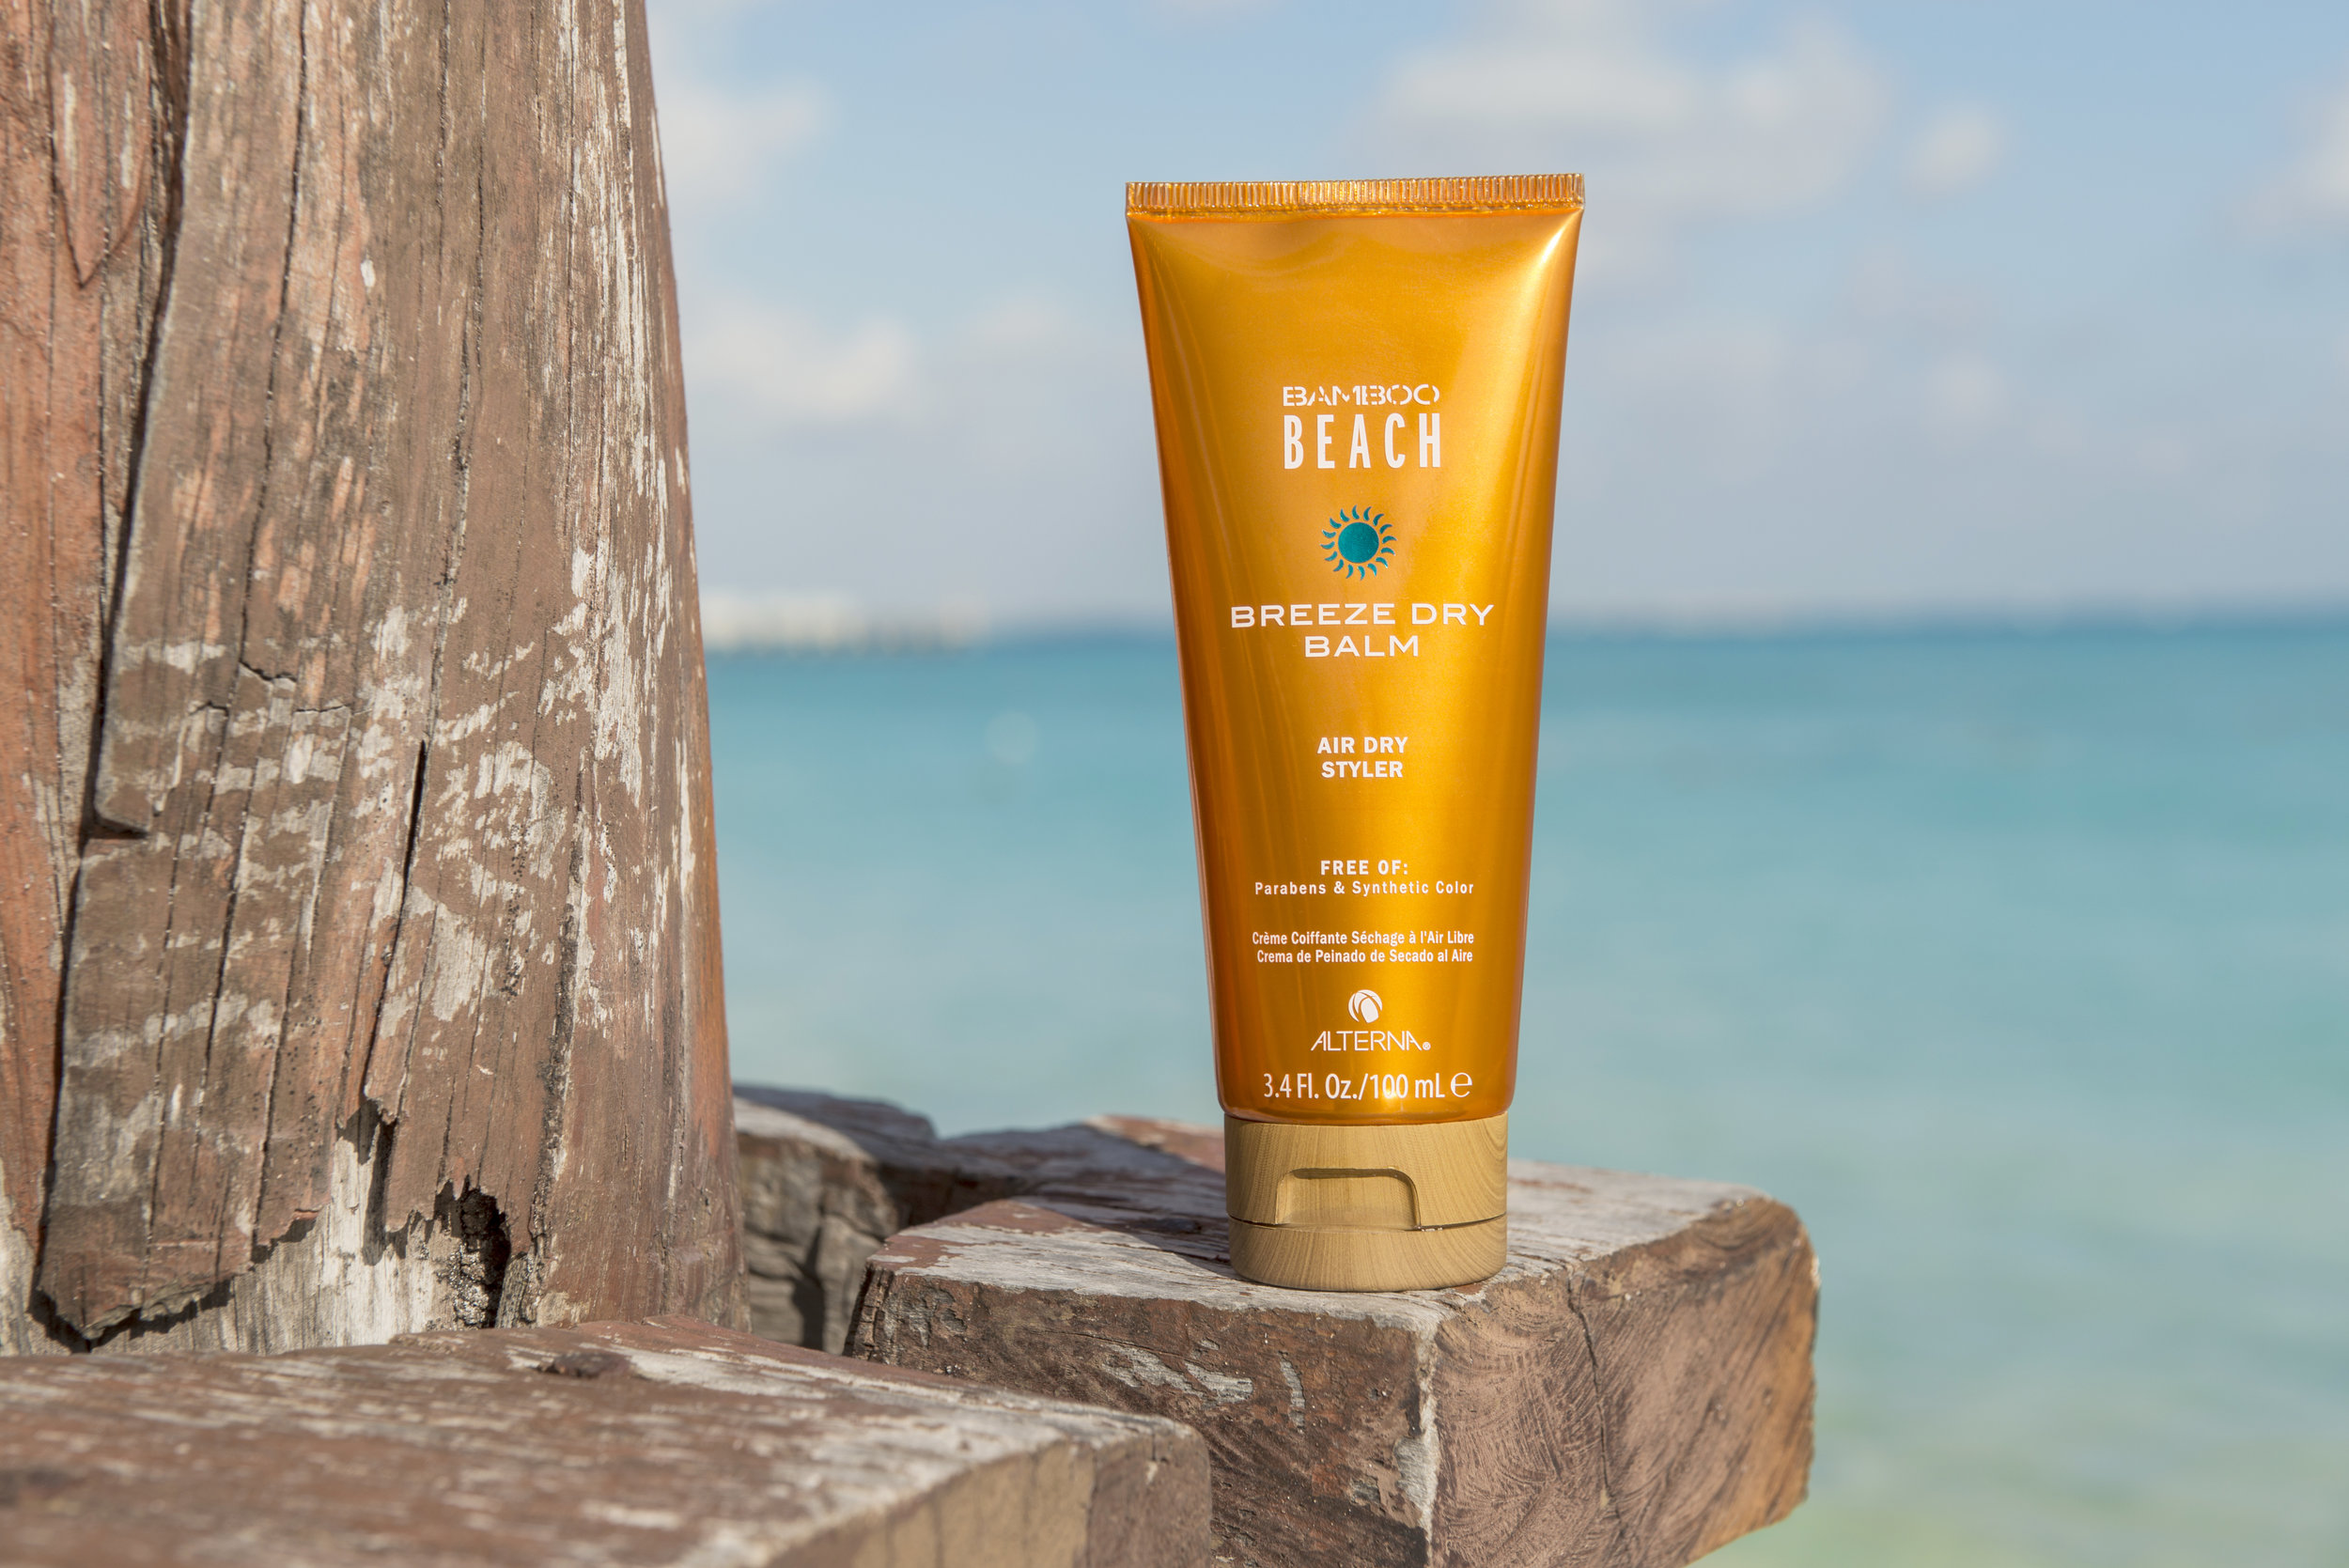 Alterna Haircare Bamboo Beach Breeze Dry Balm - photo by Andrew Werner.jpg